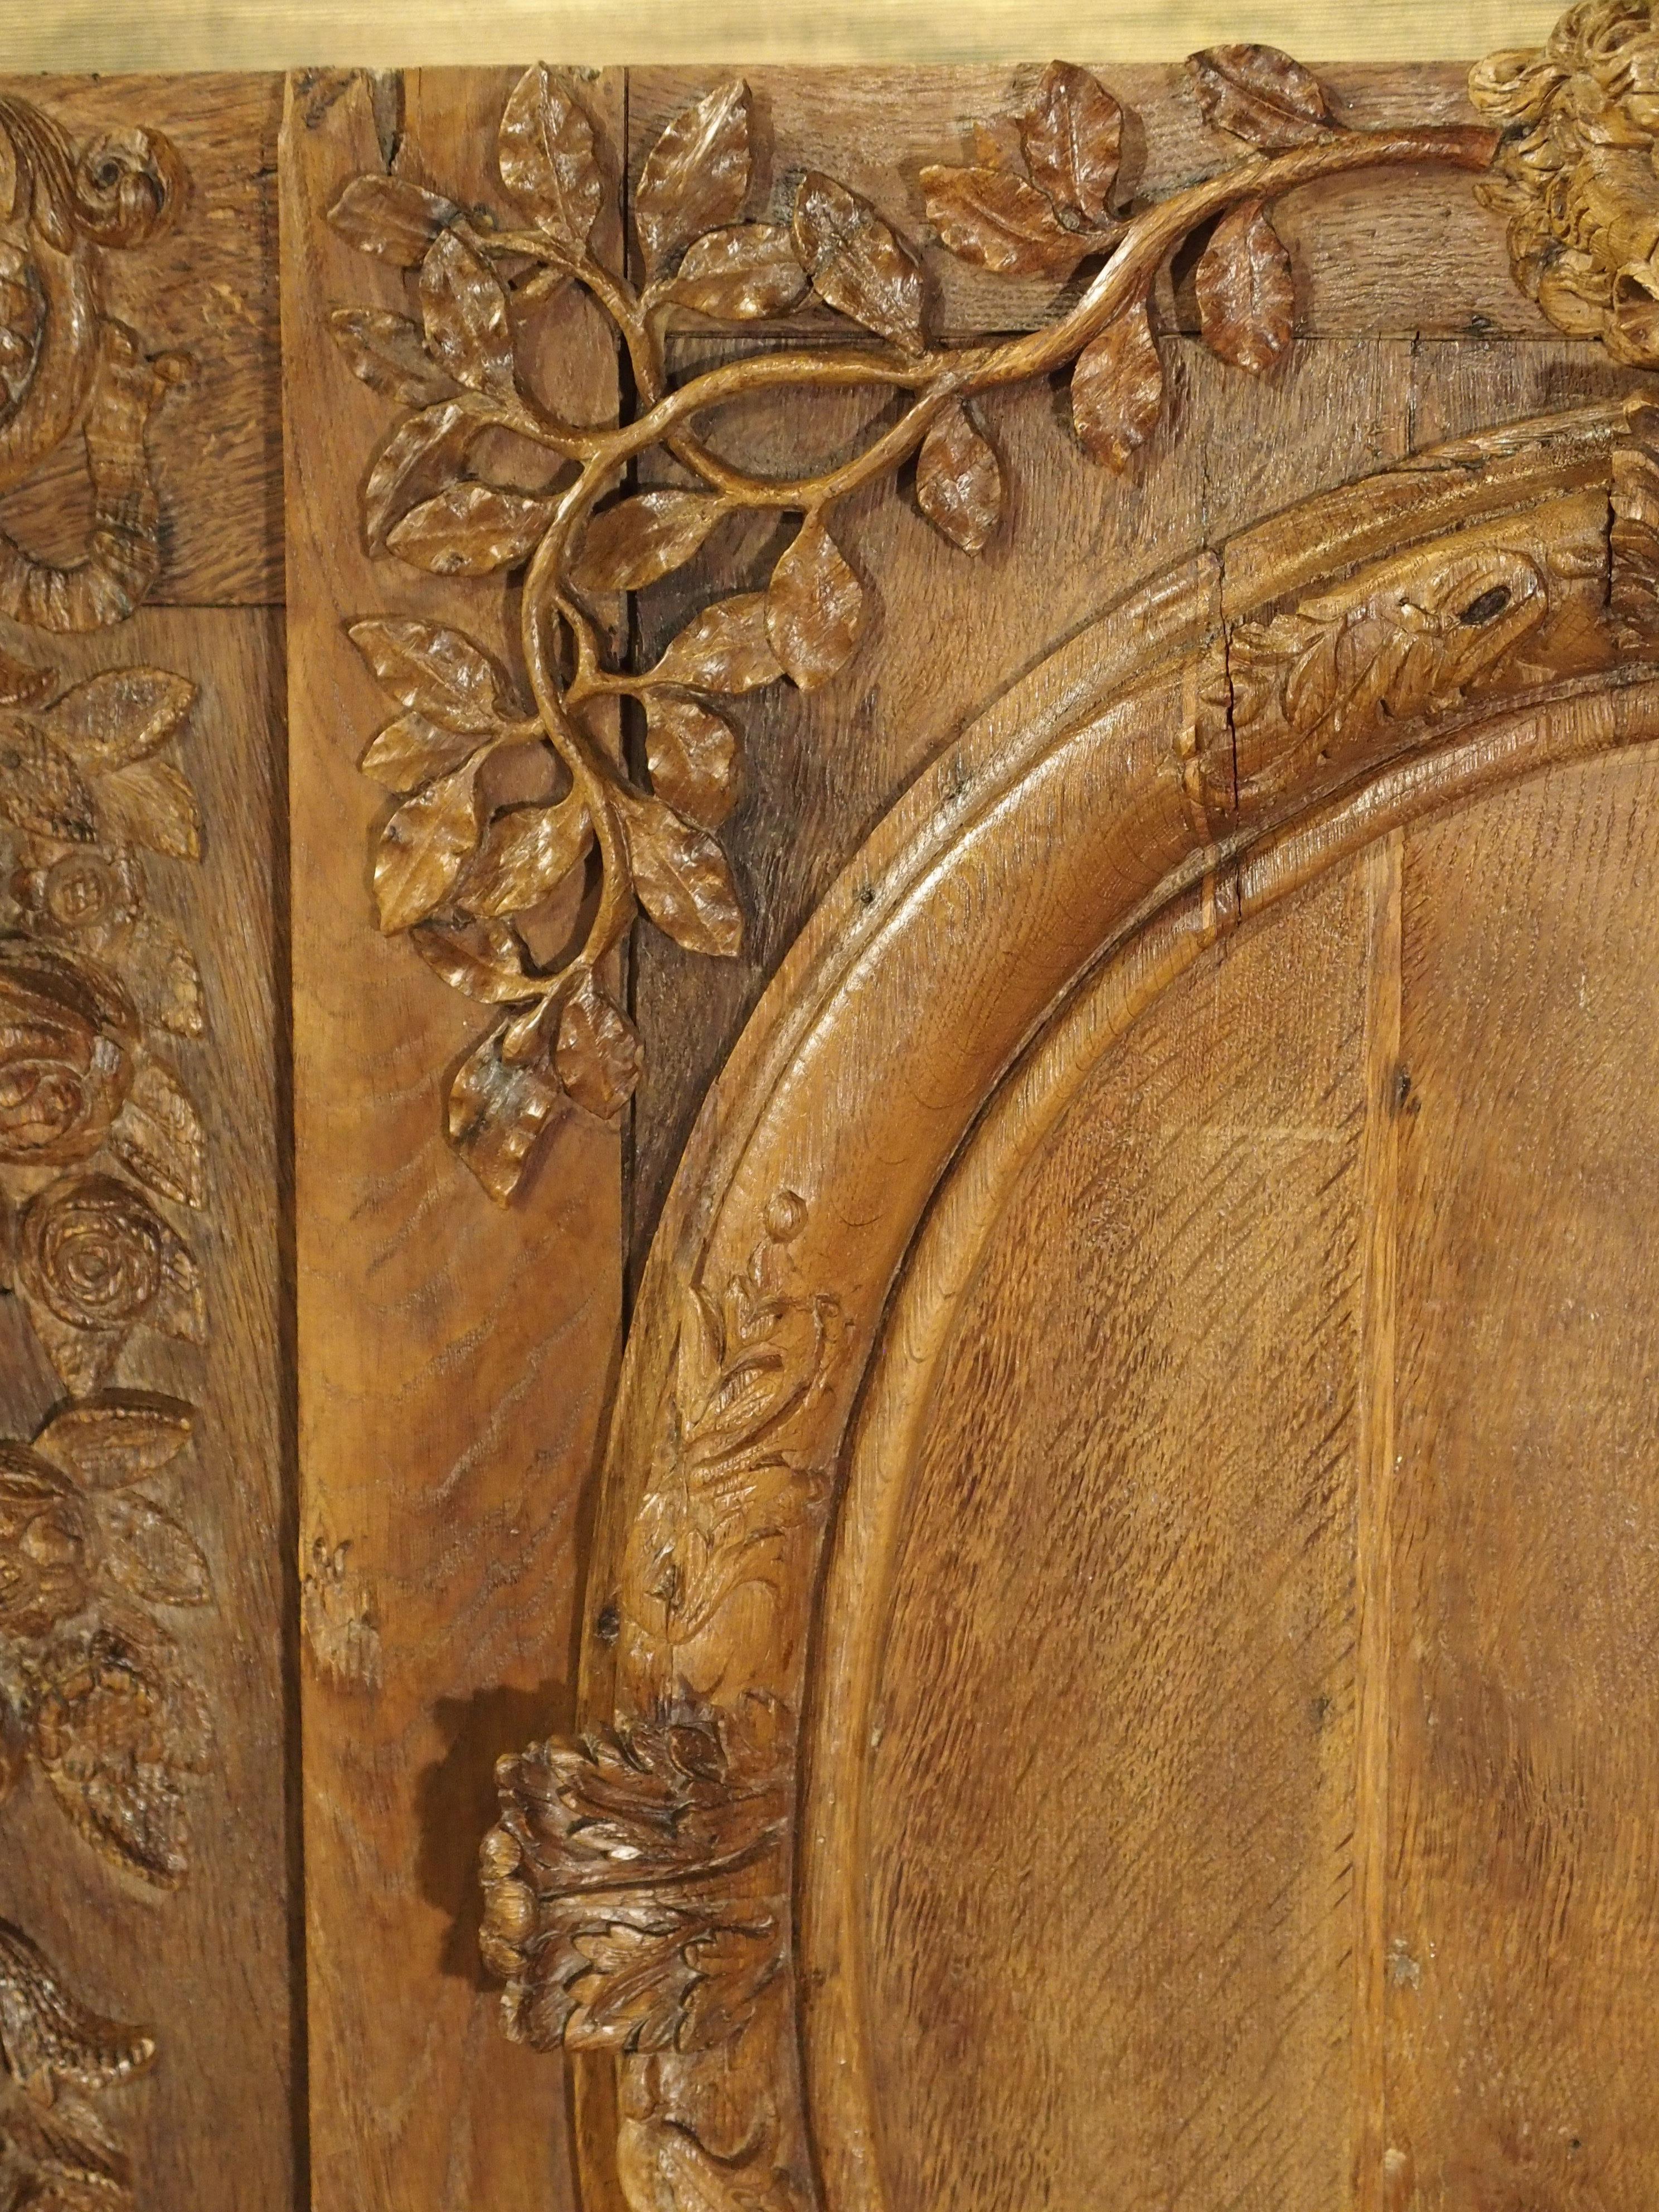 This fabulous hand-carved boiseries or wooden panel was recently purchased from the Chateau St. Maclou in Normandy, France. Rooms of boiseries had design motifs that were kept the same throughout the entire area that was paneled. For instance, on